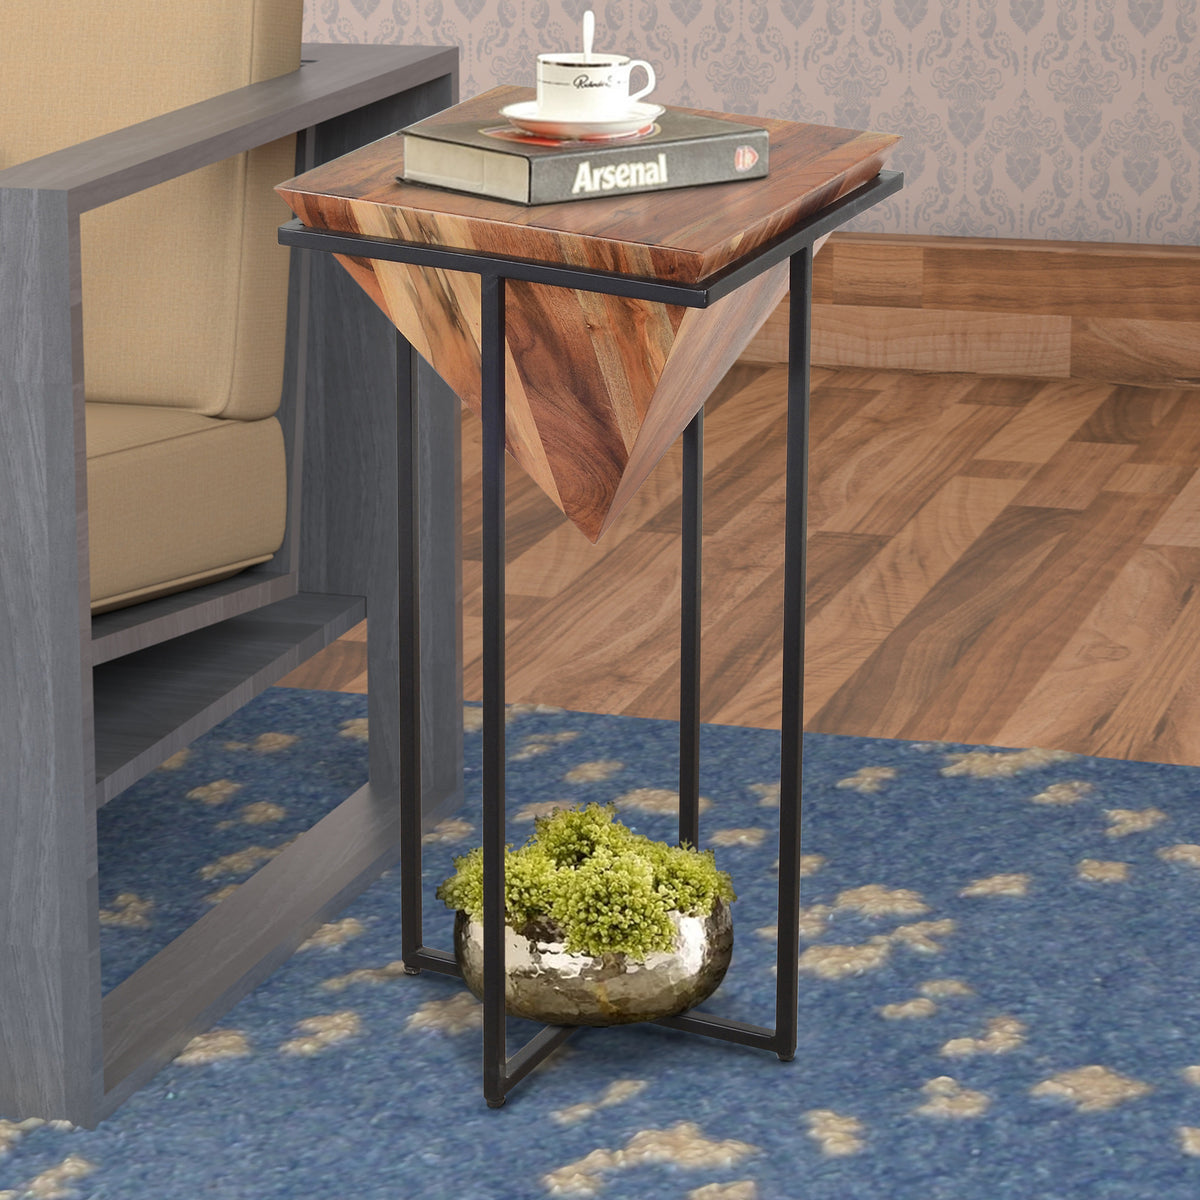 Ida 30 Inch Pyramid Shape Wooden Side Table With Cross Metal Base, Brown and Black - UPT-197870